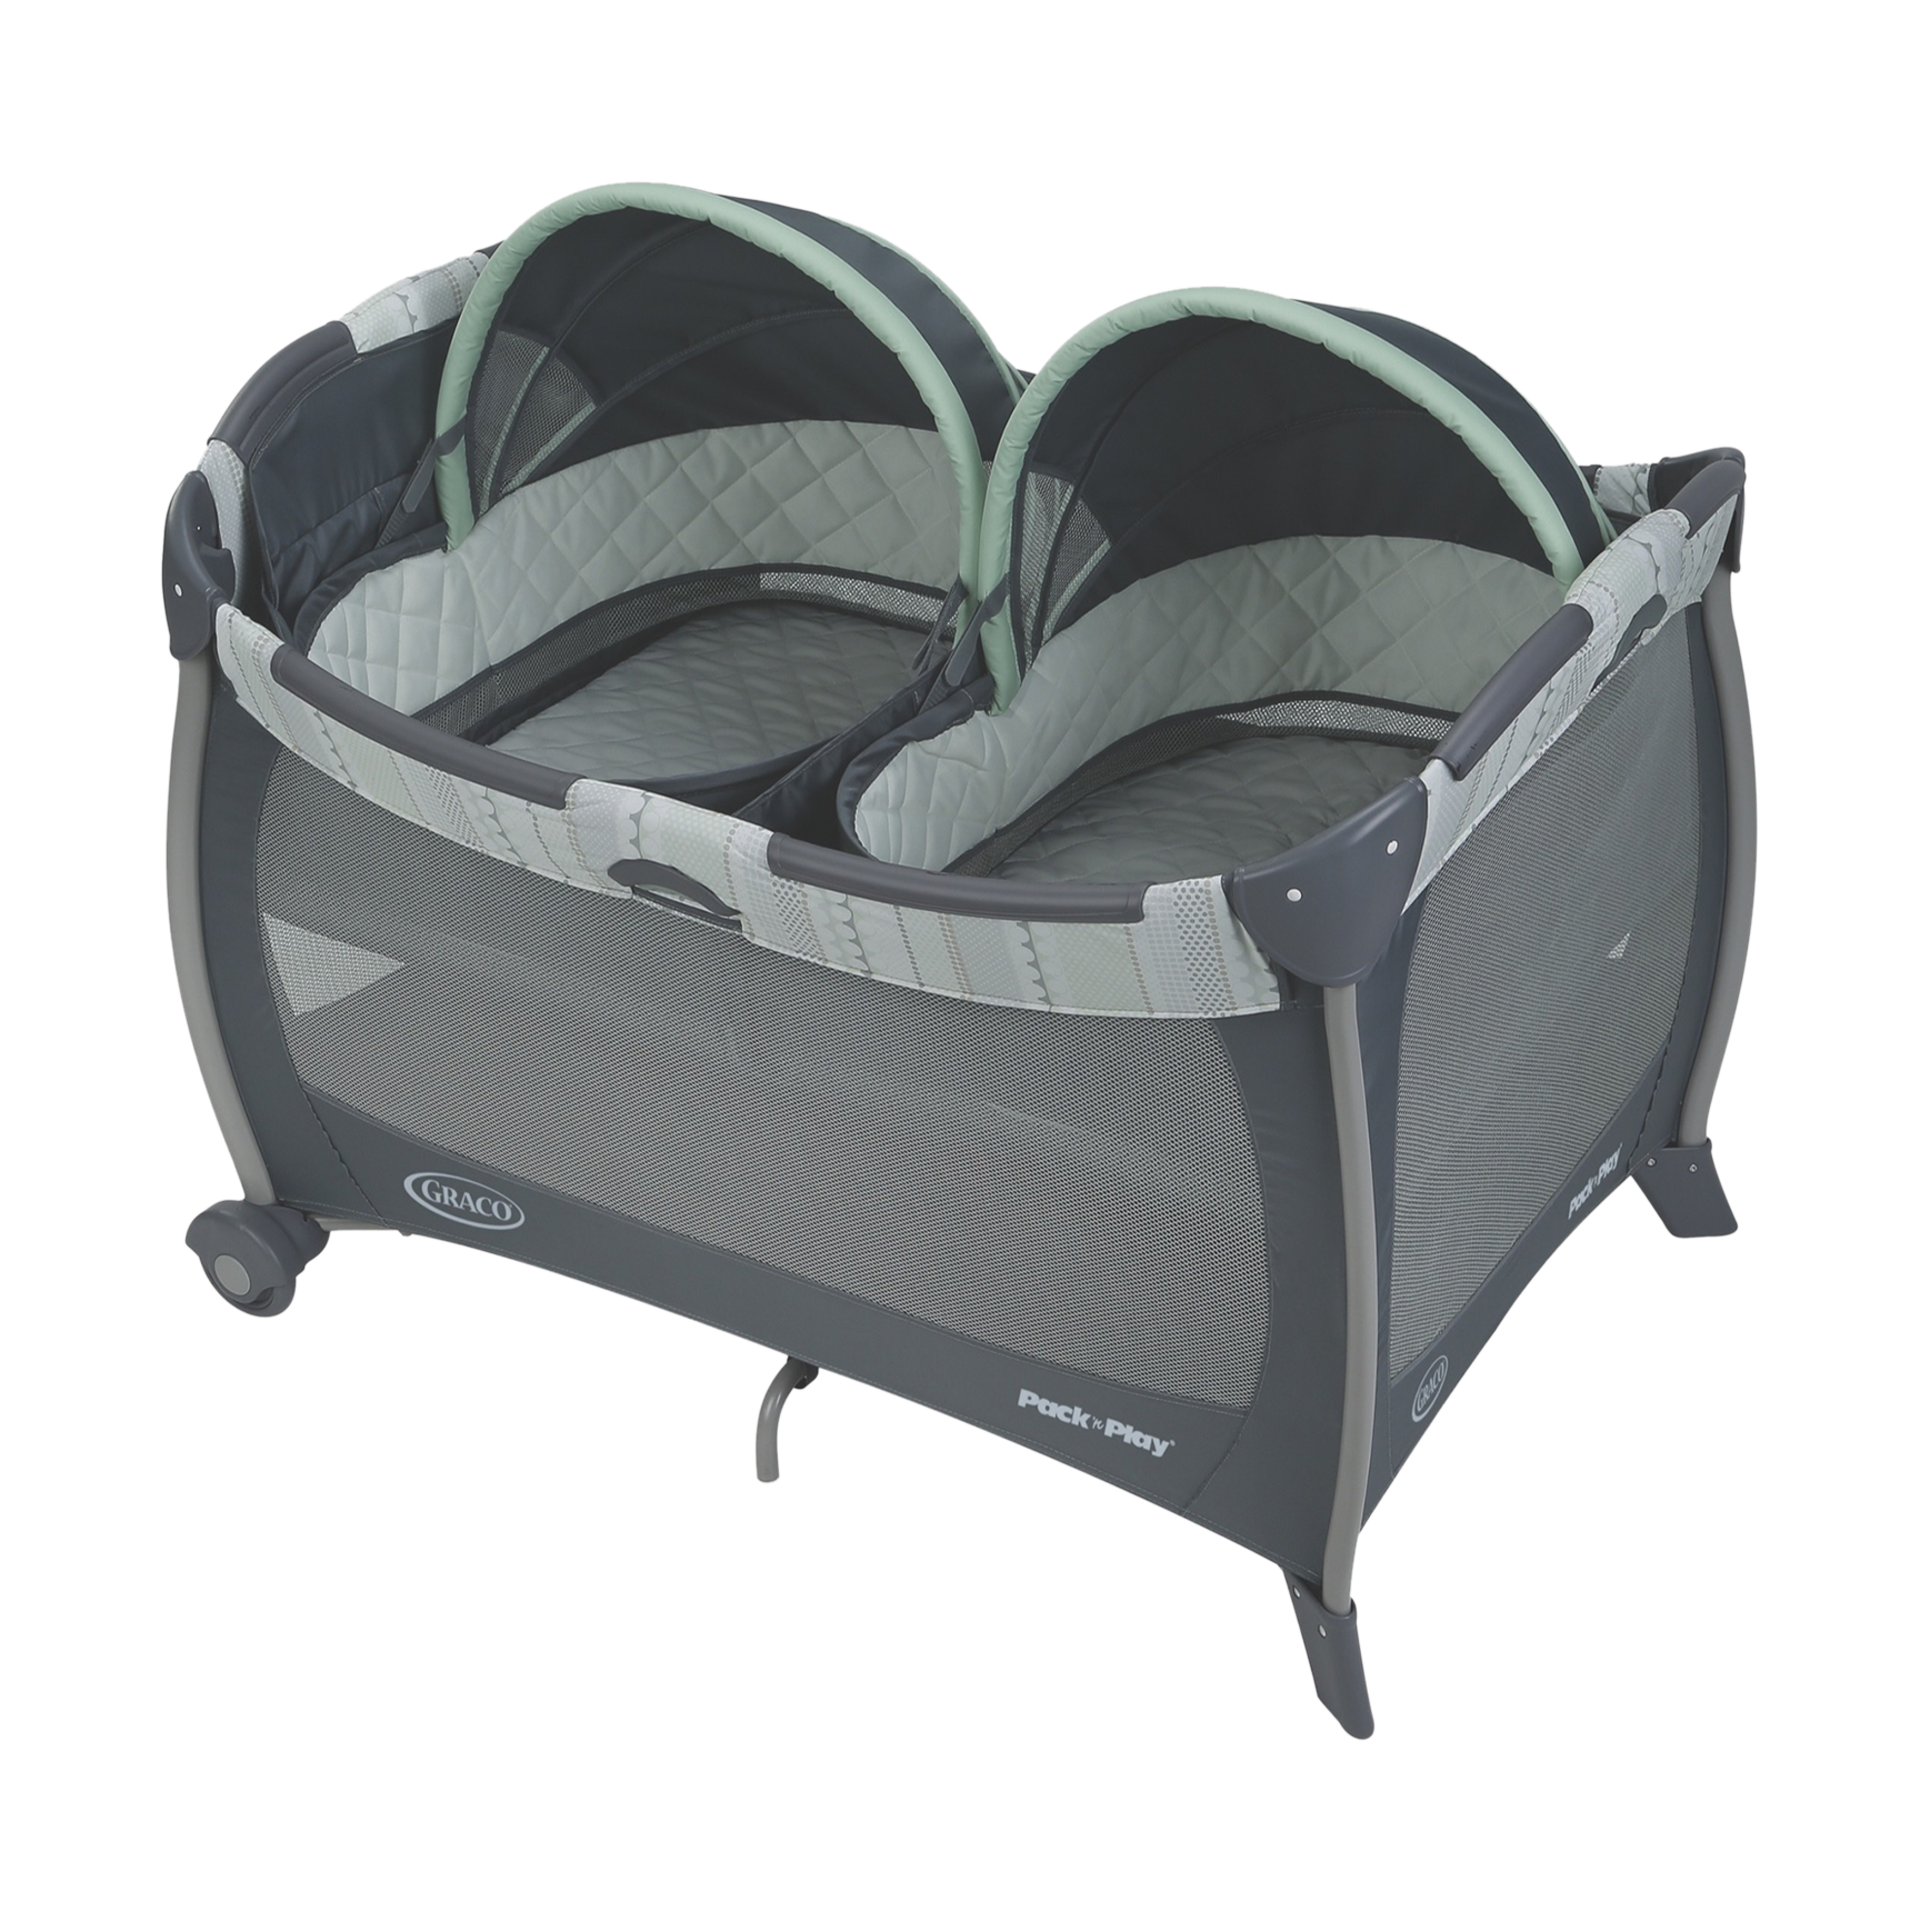 twin bouncer chairs